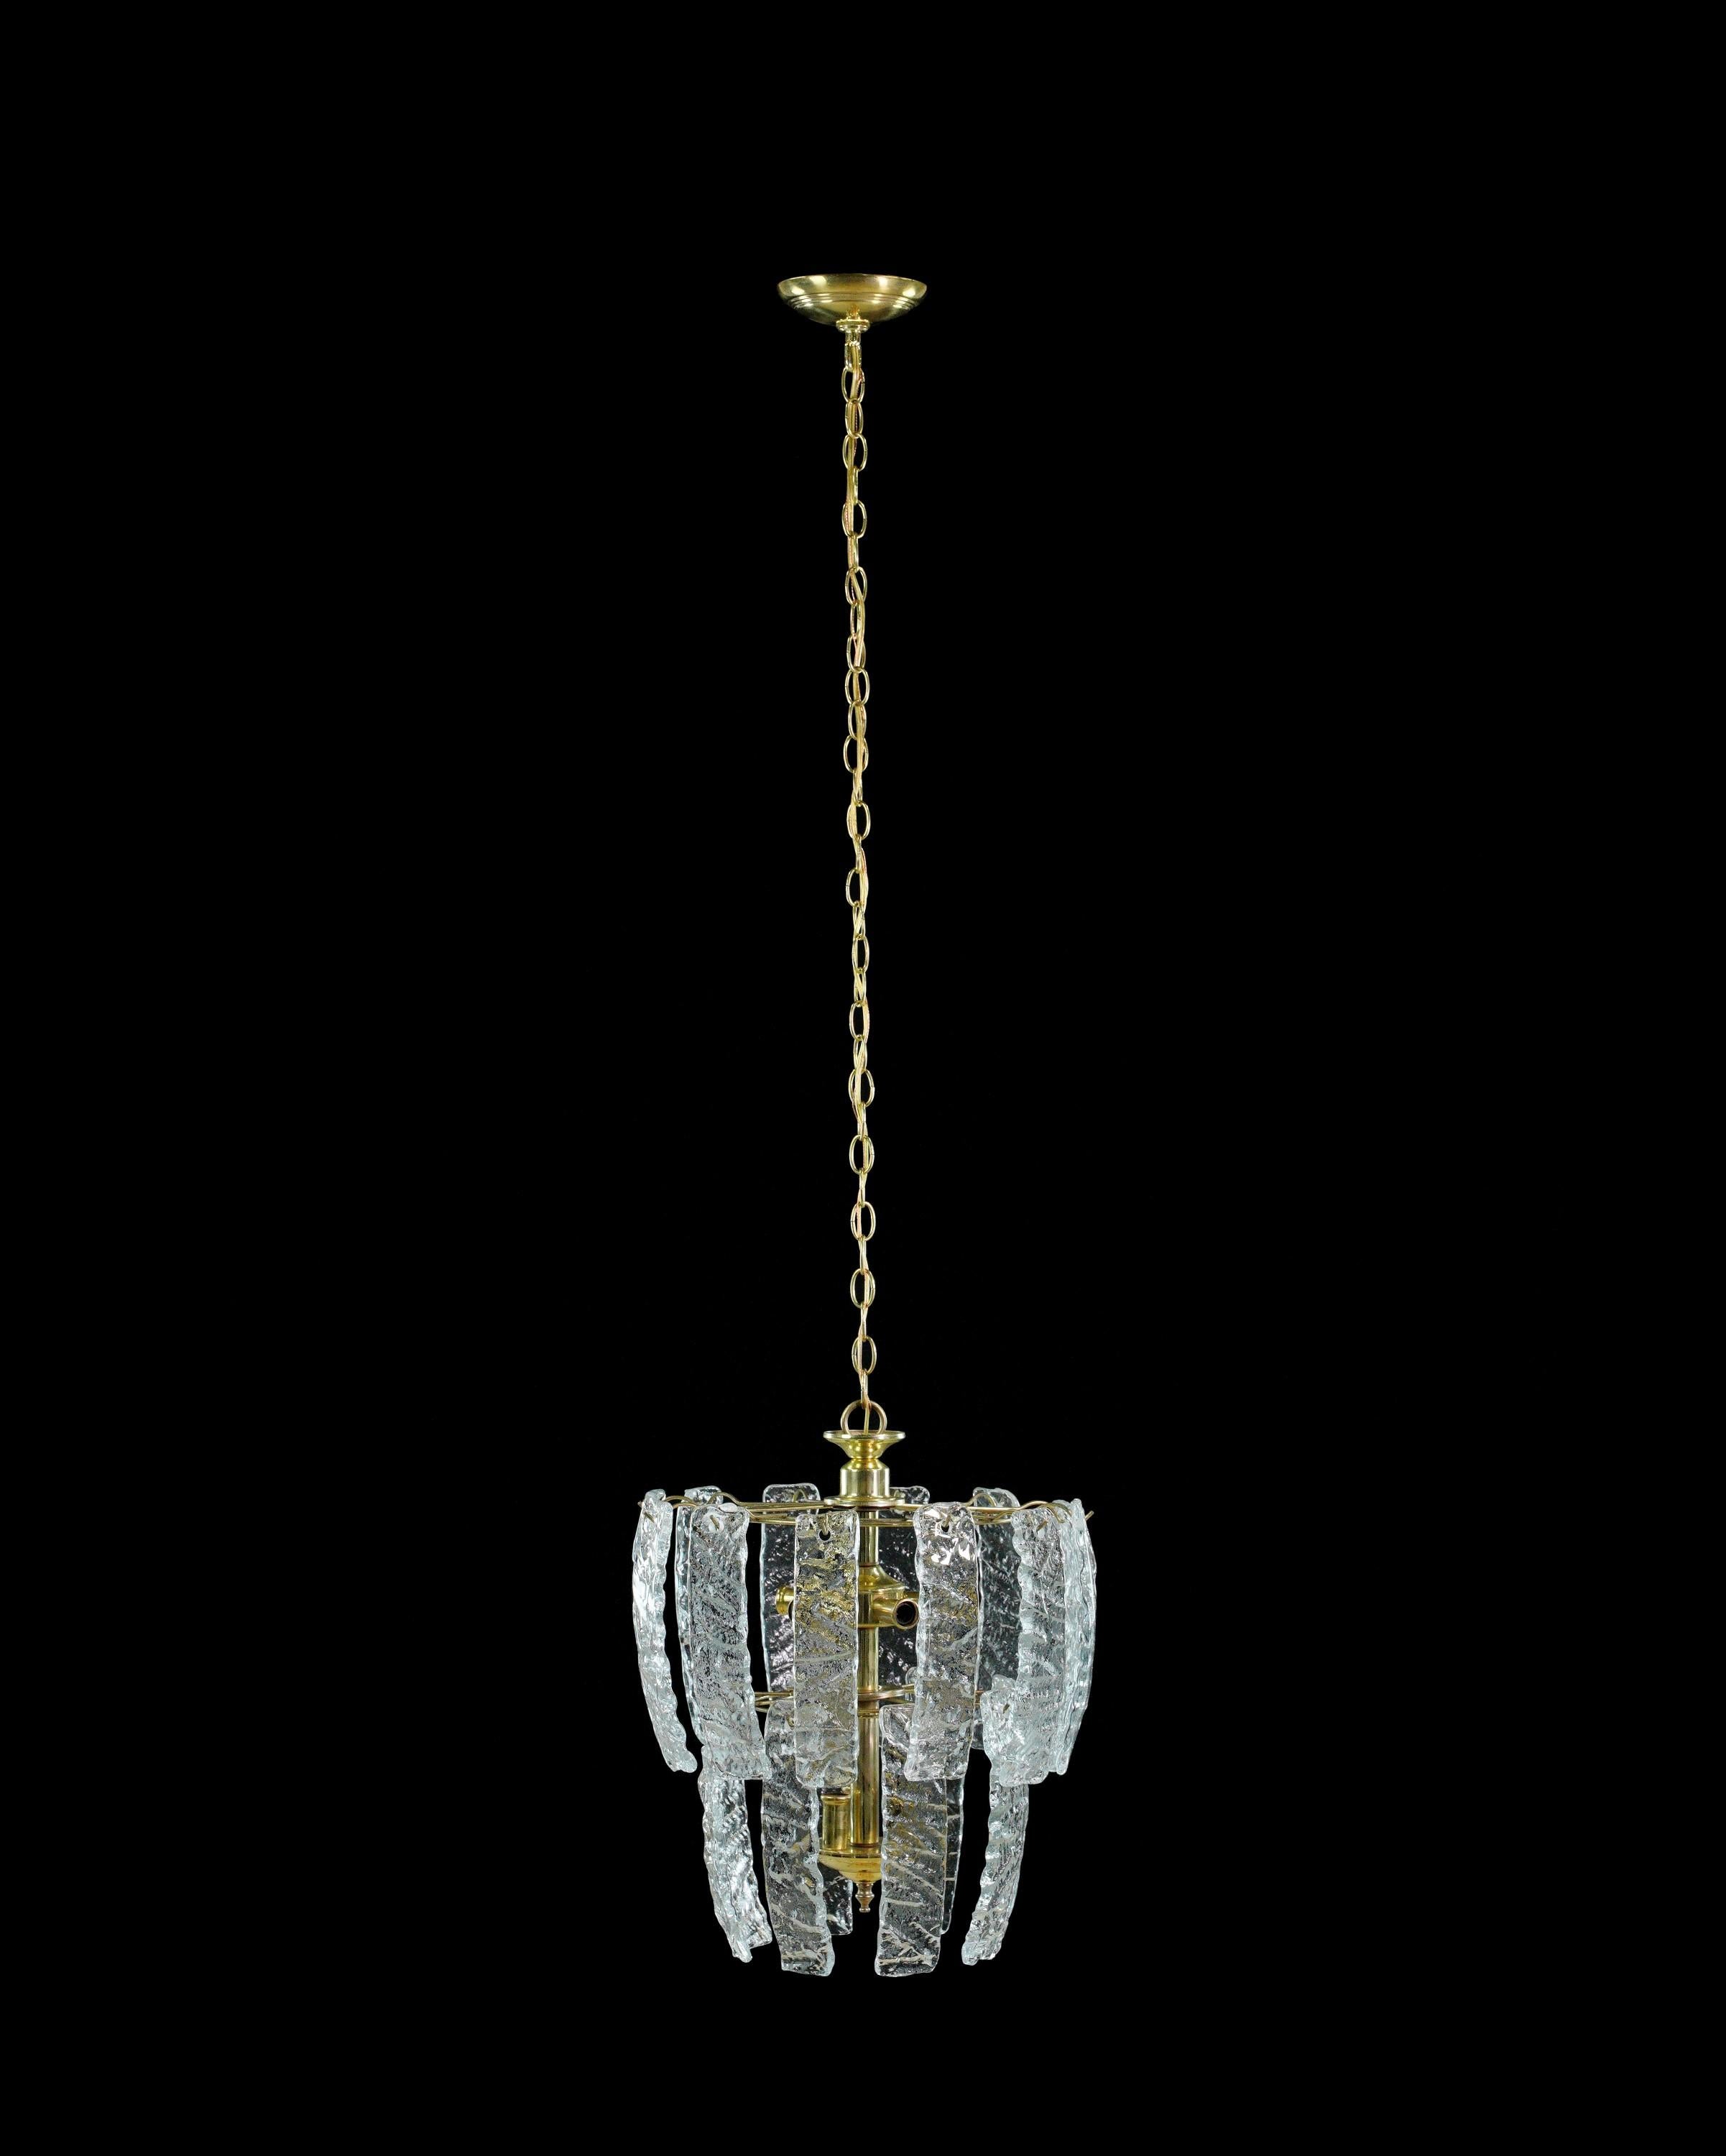 Italian Modern style chandelier crafted from brass-plated steel with a cascade of hand formed clear glass panels. This sleek and contemporary design exudes sophistication, creating a stunning focal point that illuminates with a dazzling play of